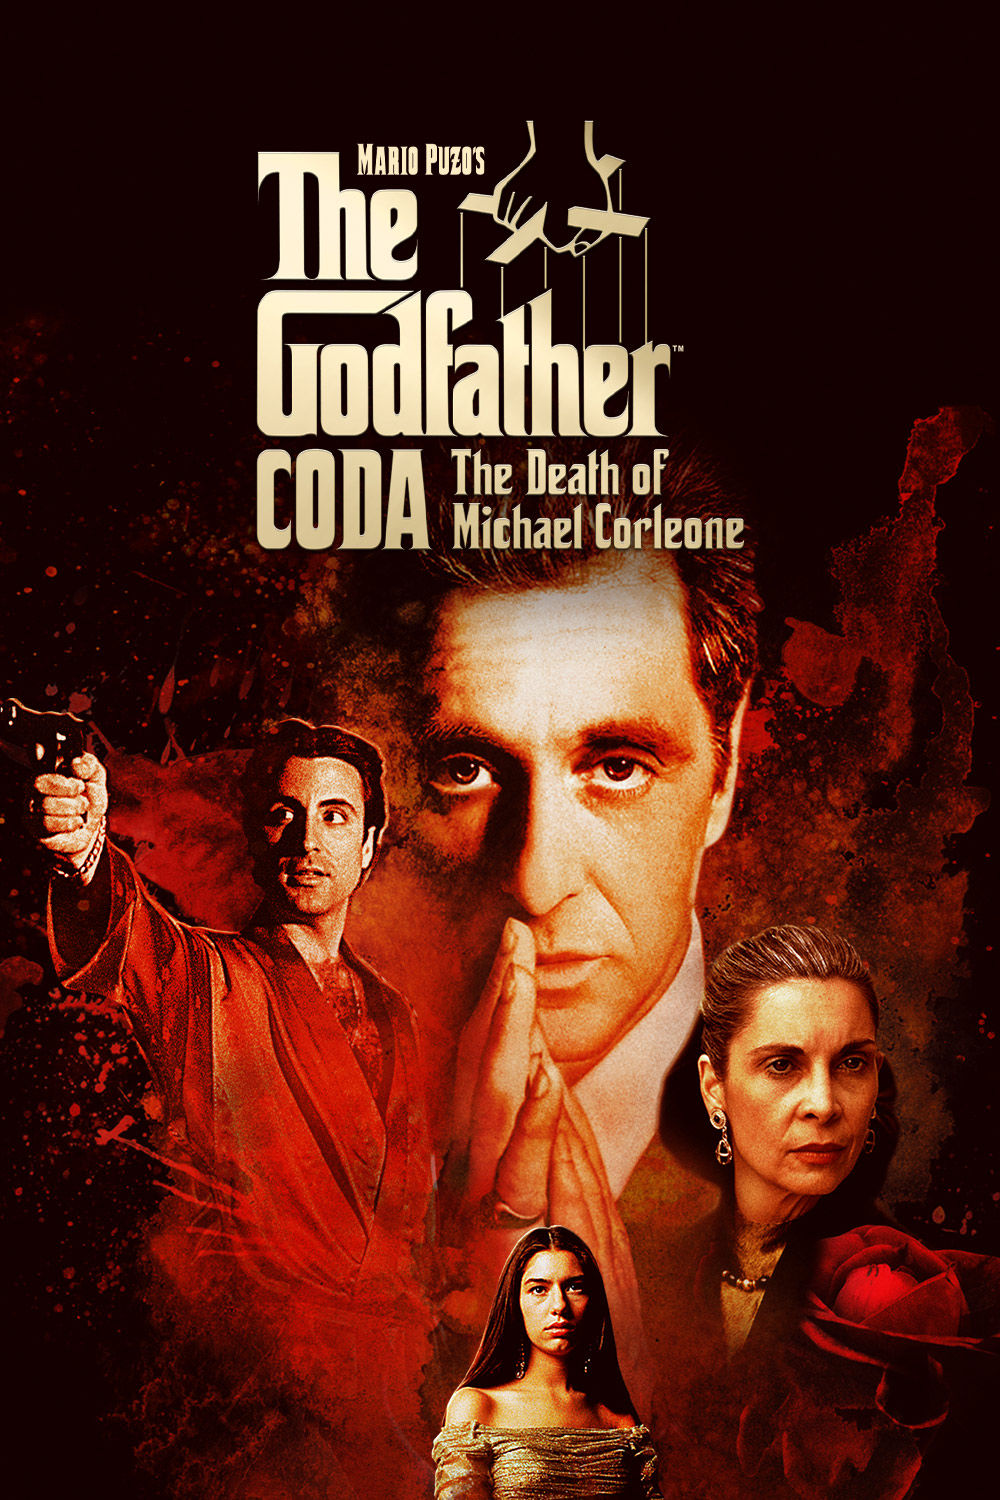 Watch The Godfather Coda: The Death of Michael Corleone Online